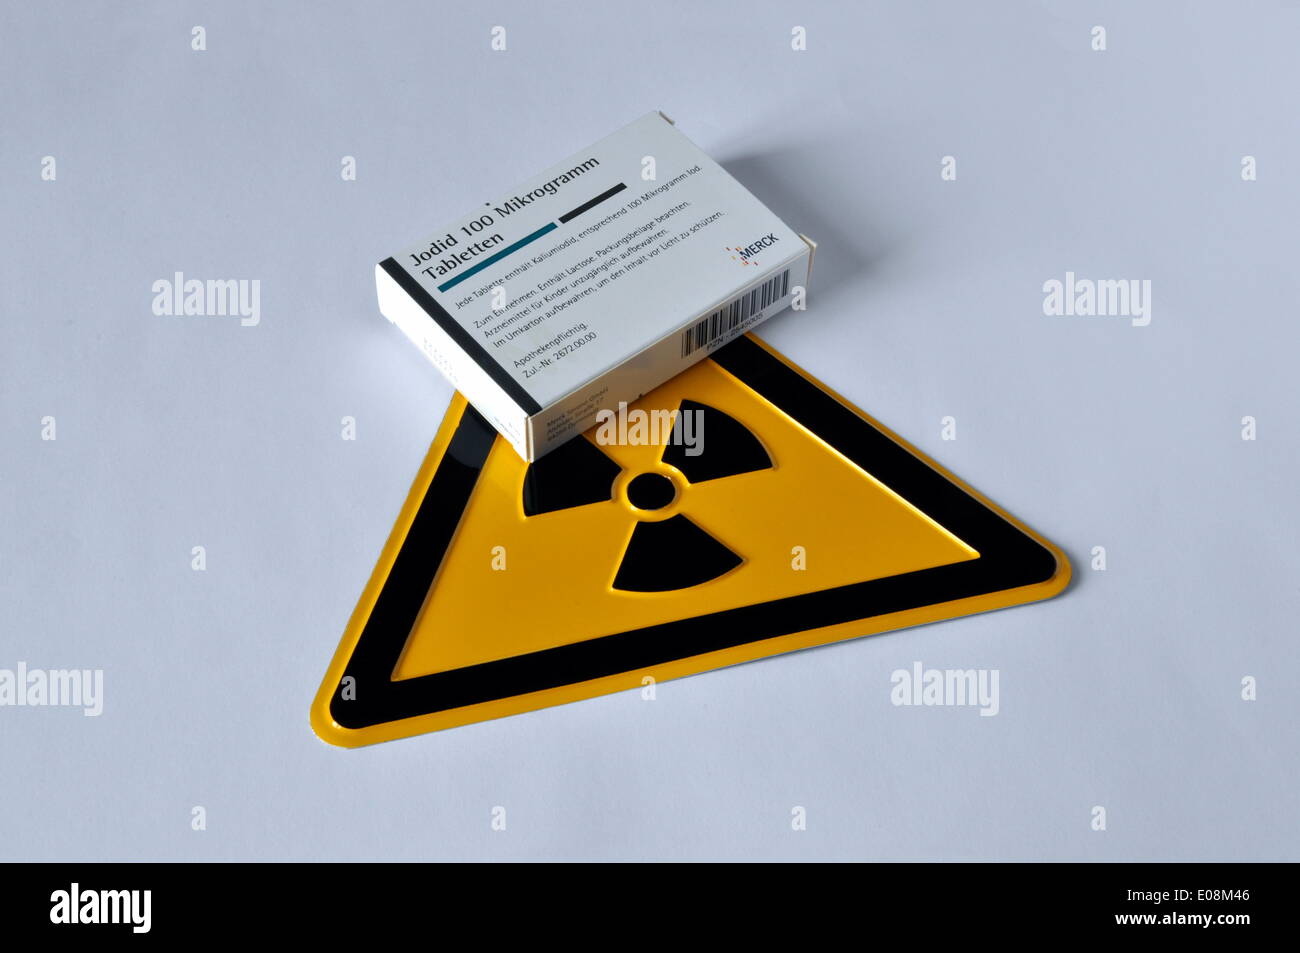 Illustration - Iodine tablets sit on a adioactive trefoil sign in Germany, 03 April 2011. Fotoarchiv für ZeitgeschichteS. Steinach - NO WIRE SERVICE Stock Photo